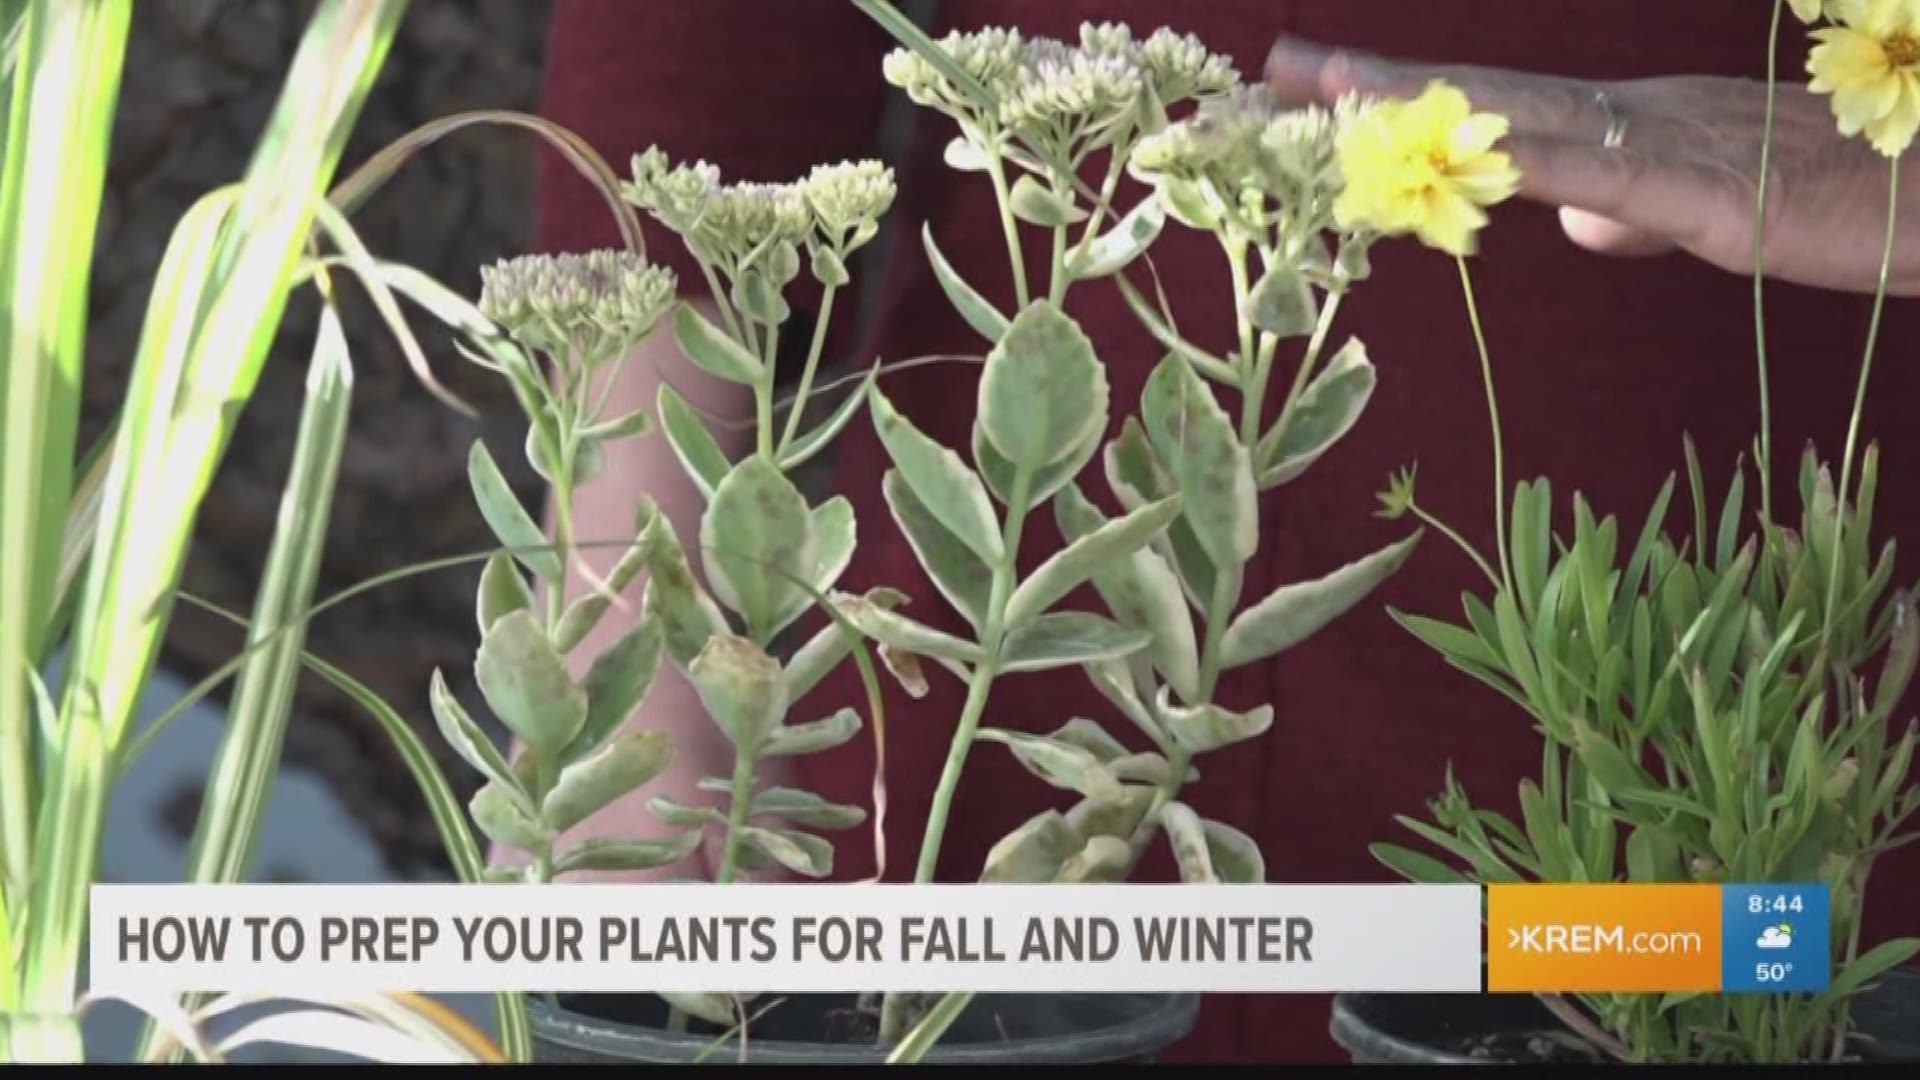 The Friends of Manito stop by the KREM 2 studio to show us how gardeners can transition from summer to fall and winter.